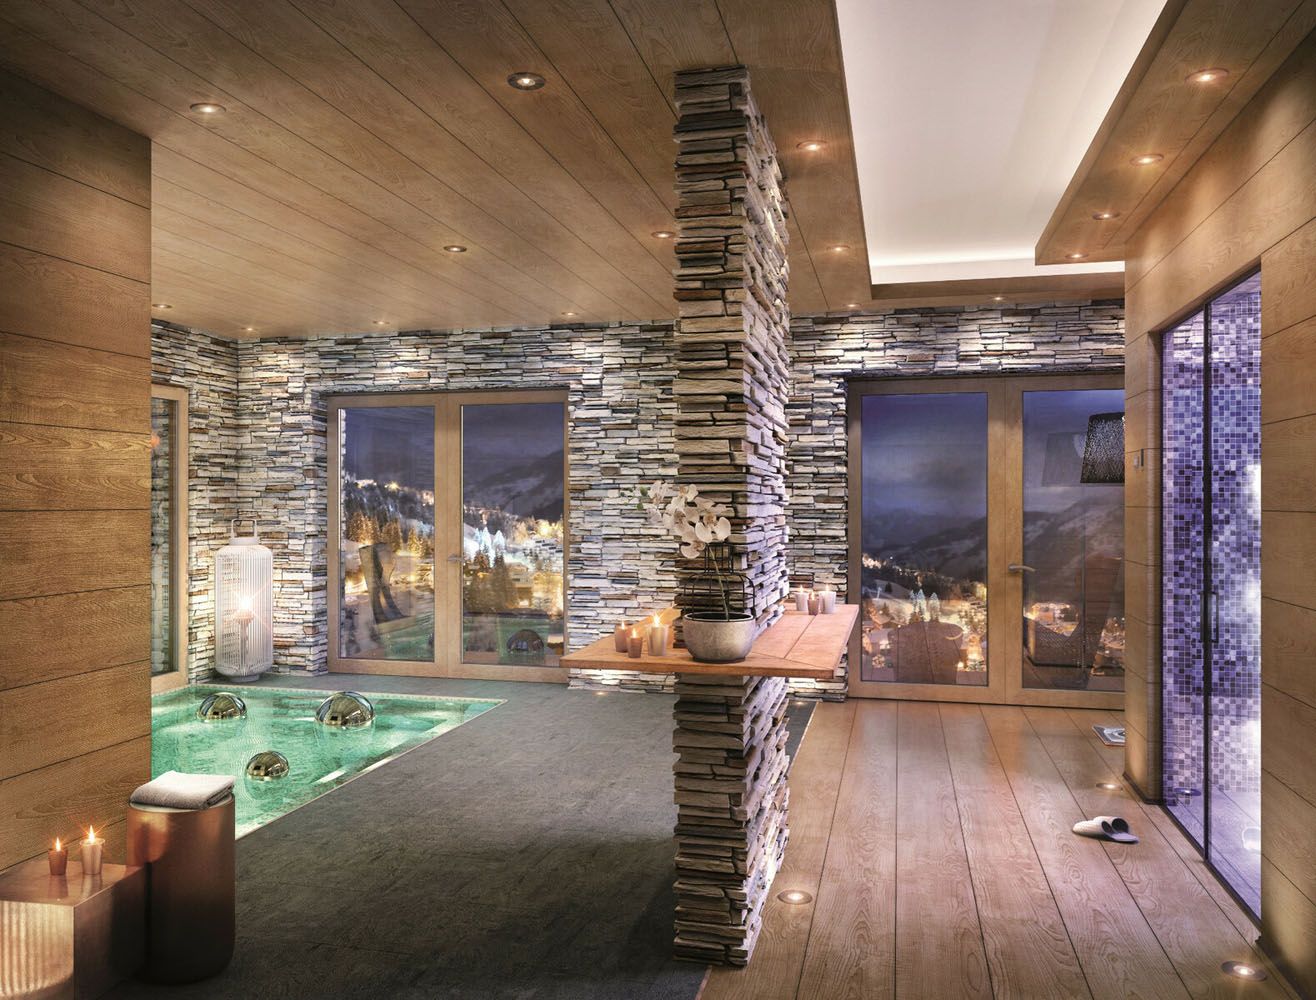 6 bed Apartment For Sale in Three Valleys, French Alps